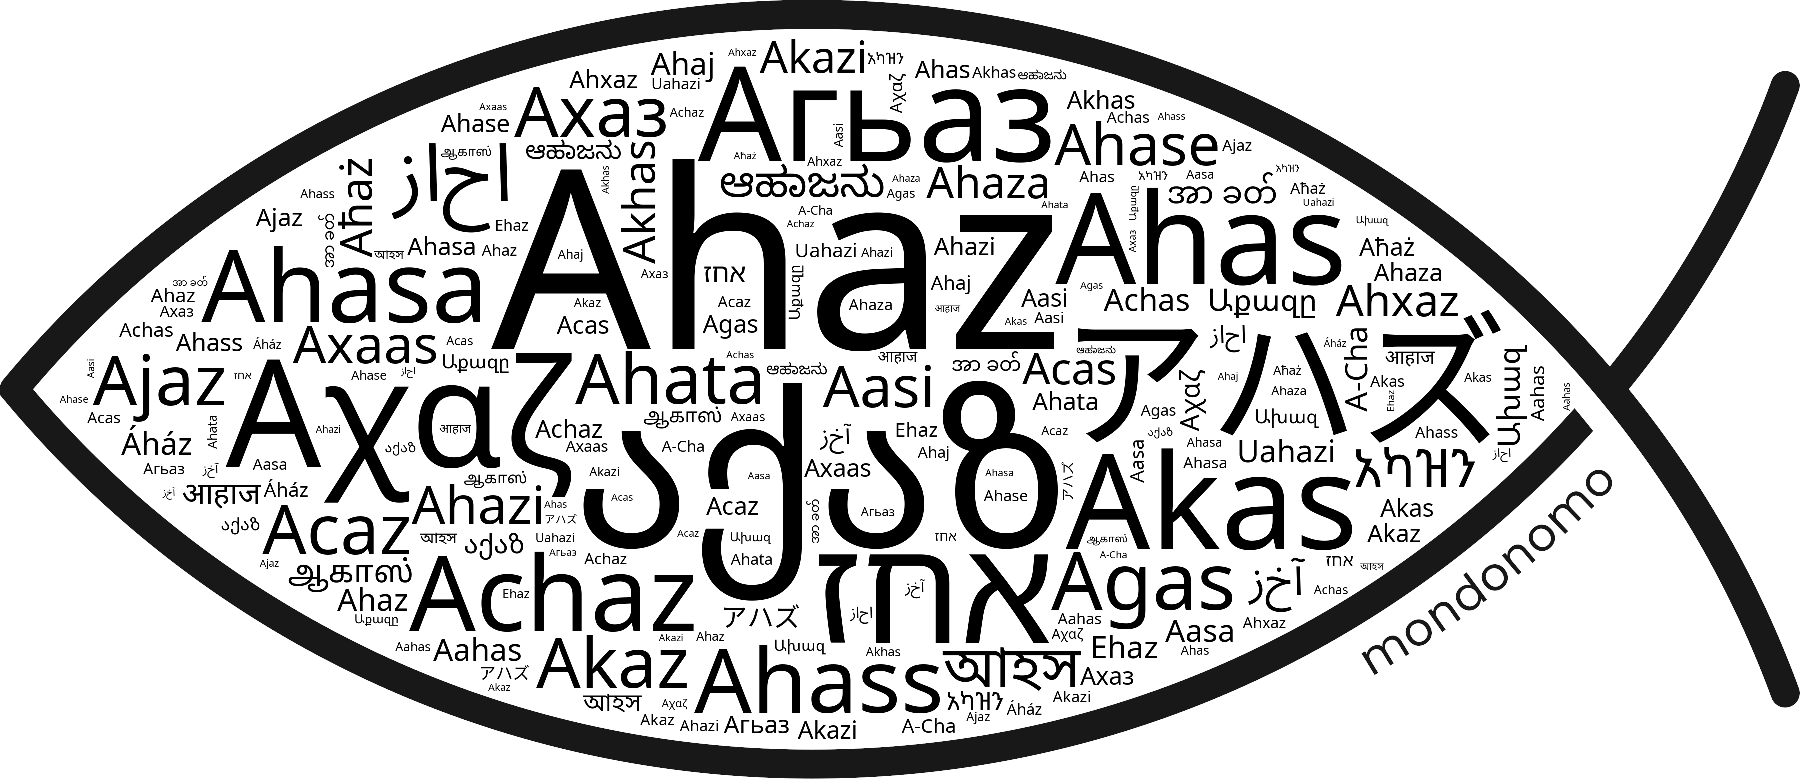 Name Ahaz in the world's Bibles